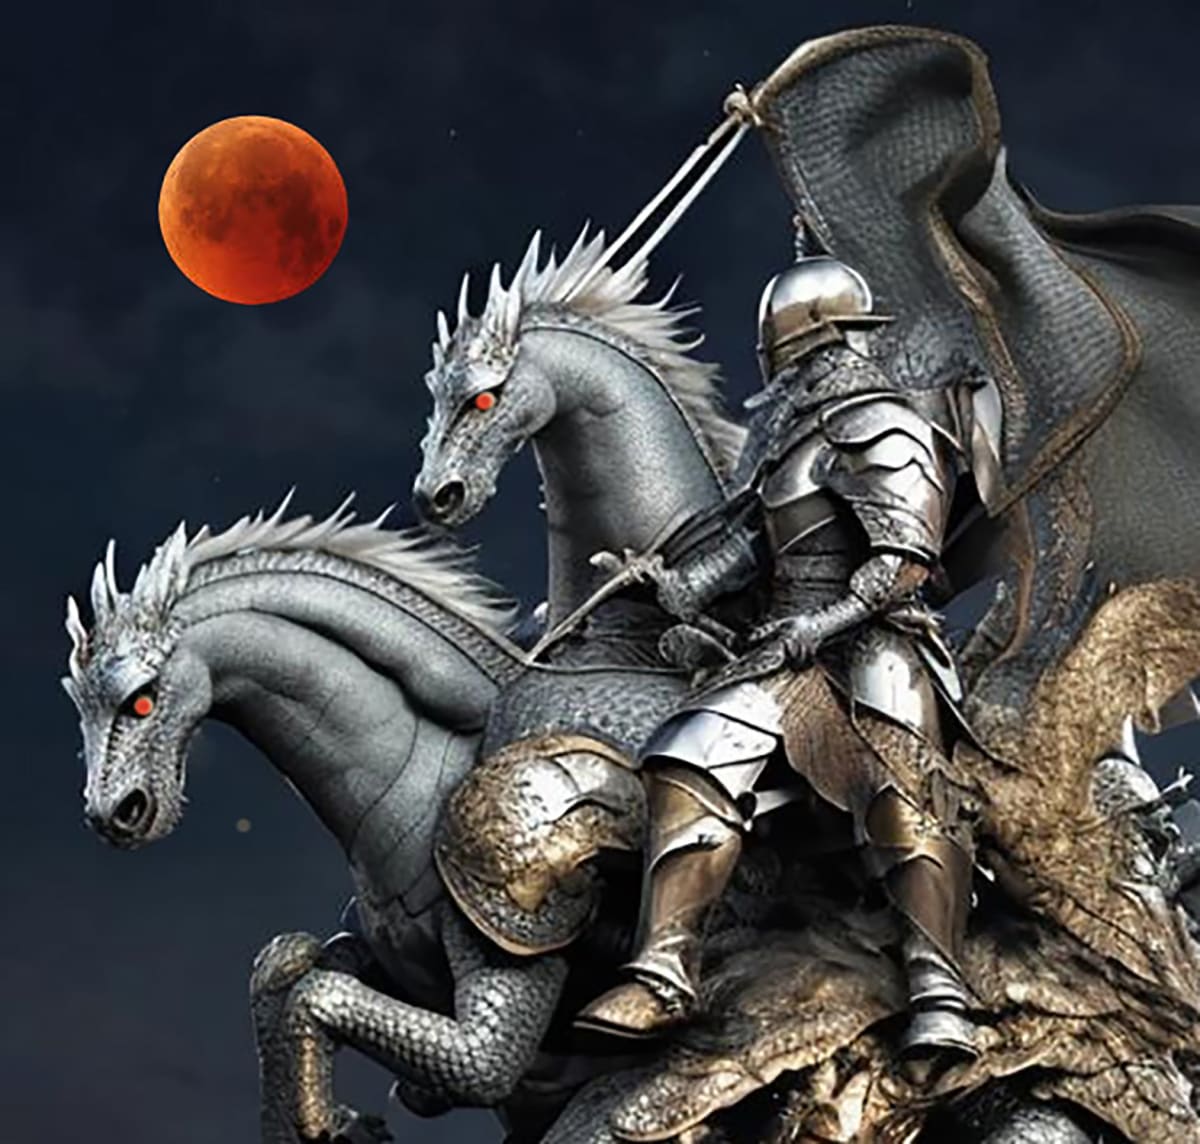 BLOOD MOON KNIGHT RIDER by Linda Leftwich  Image: Hong Chi Lin two headed dragon horse